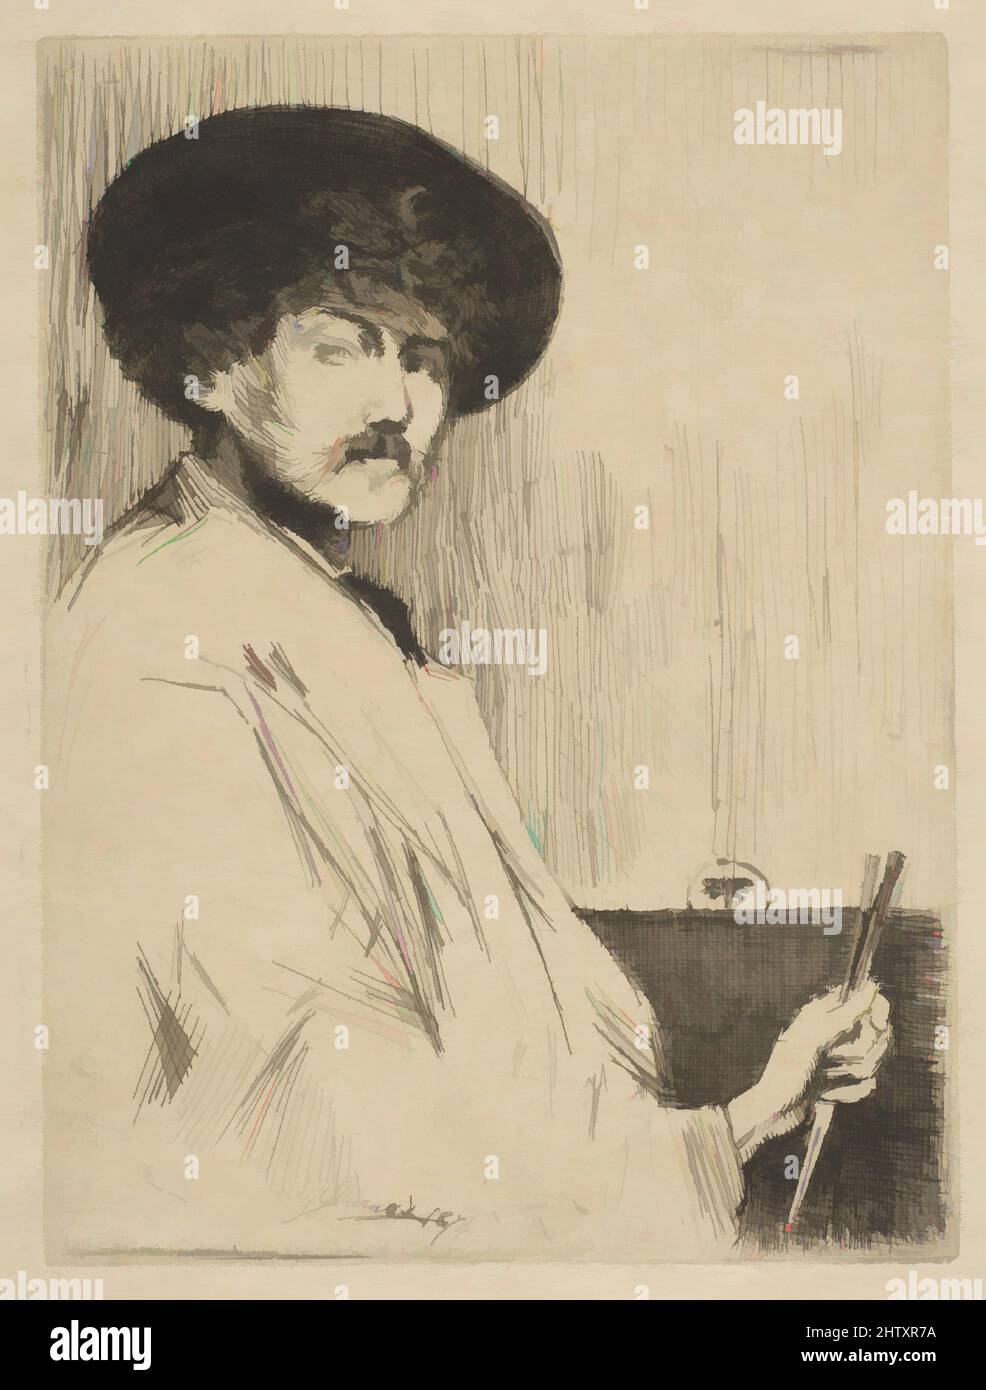 Art inspired by James McNeill Whistler, 1874, Etching; proof, plate: 5 1/8 x 3 7/8 in. (13 x 9.8 cm), Prints, Percy Thomas (British, London 1846–1922 London, Classic works modernized by Artotop with a splash of modernity. Shapes, color and value, eye-catching visual impact on art. Emotions through freedom of artworks in a contemporary way. A timeless message pursuing a wildly creative new direction. Artists turning to the digital medium and creating the Artotop NFT Stock Photo